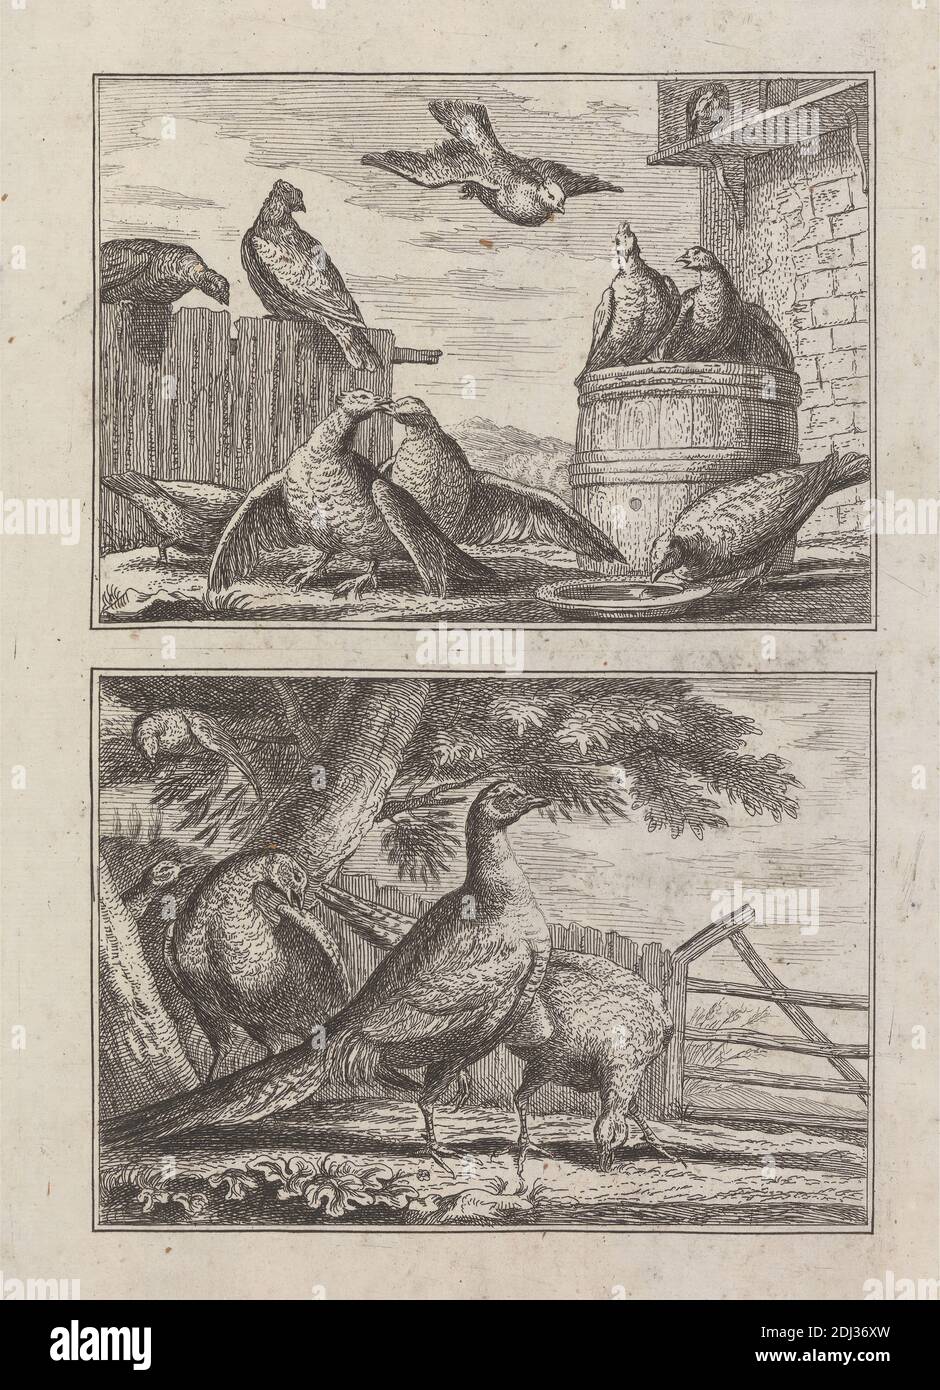 Doves and Pheasants on two plates on one sheet for 'A New Kind of Drawing Book...of various kinds of Birds Drawn from Life by Mr. Francis Barlow' 1731 (1 of 9), Print made by George Bickham, 1683/4–1758, British, after Francis Barlow, ca. 1626–1704, British, Published by Henry Overton, 1675/6–1751, British, 1731, Etching on medium, smooth, cream laid paper, Sheet: 11 5/16 x 7 3/8 inches (28.8 x 18.7 cm), Plate: 8 7/16 x 6 1/16 inches (21.5 x 15.4 cm), Image: 3 7/16 x 4 15/16 inches (8.7 x 12.5 cm), and Image: 3 1/2 x 4 15/16 inches (8.9 x 12.5 cm), animal art, barrel, birds, courtship, dish Stock Photo